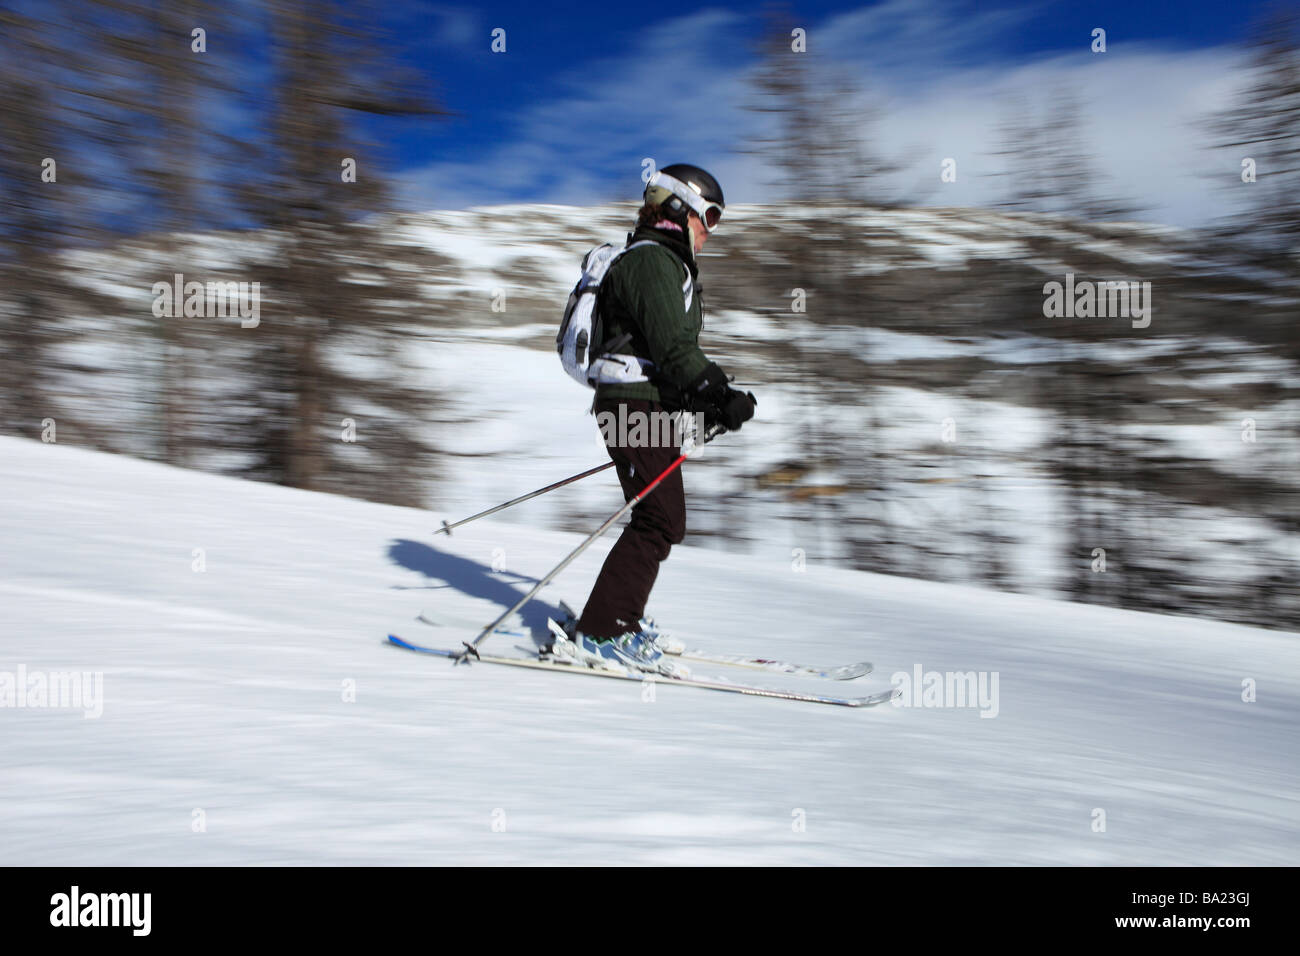 Skier takes a break at the edge of the piste in the ski resort of Tignes Le Lac, Espace Killy, France Stock Photo